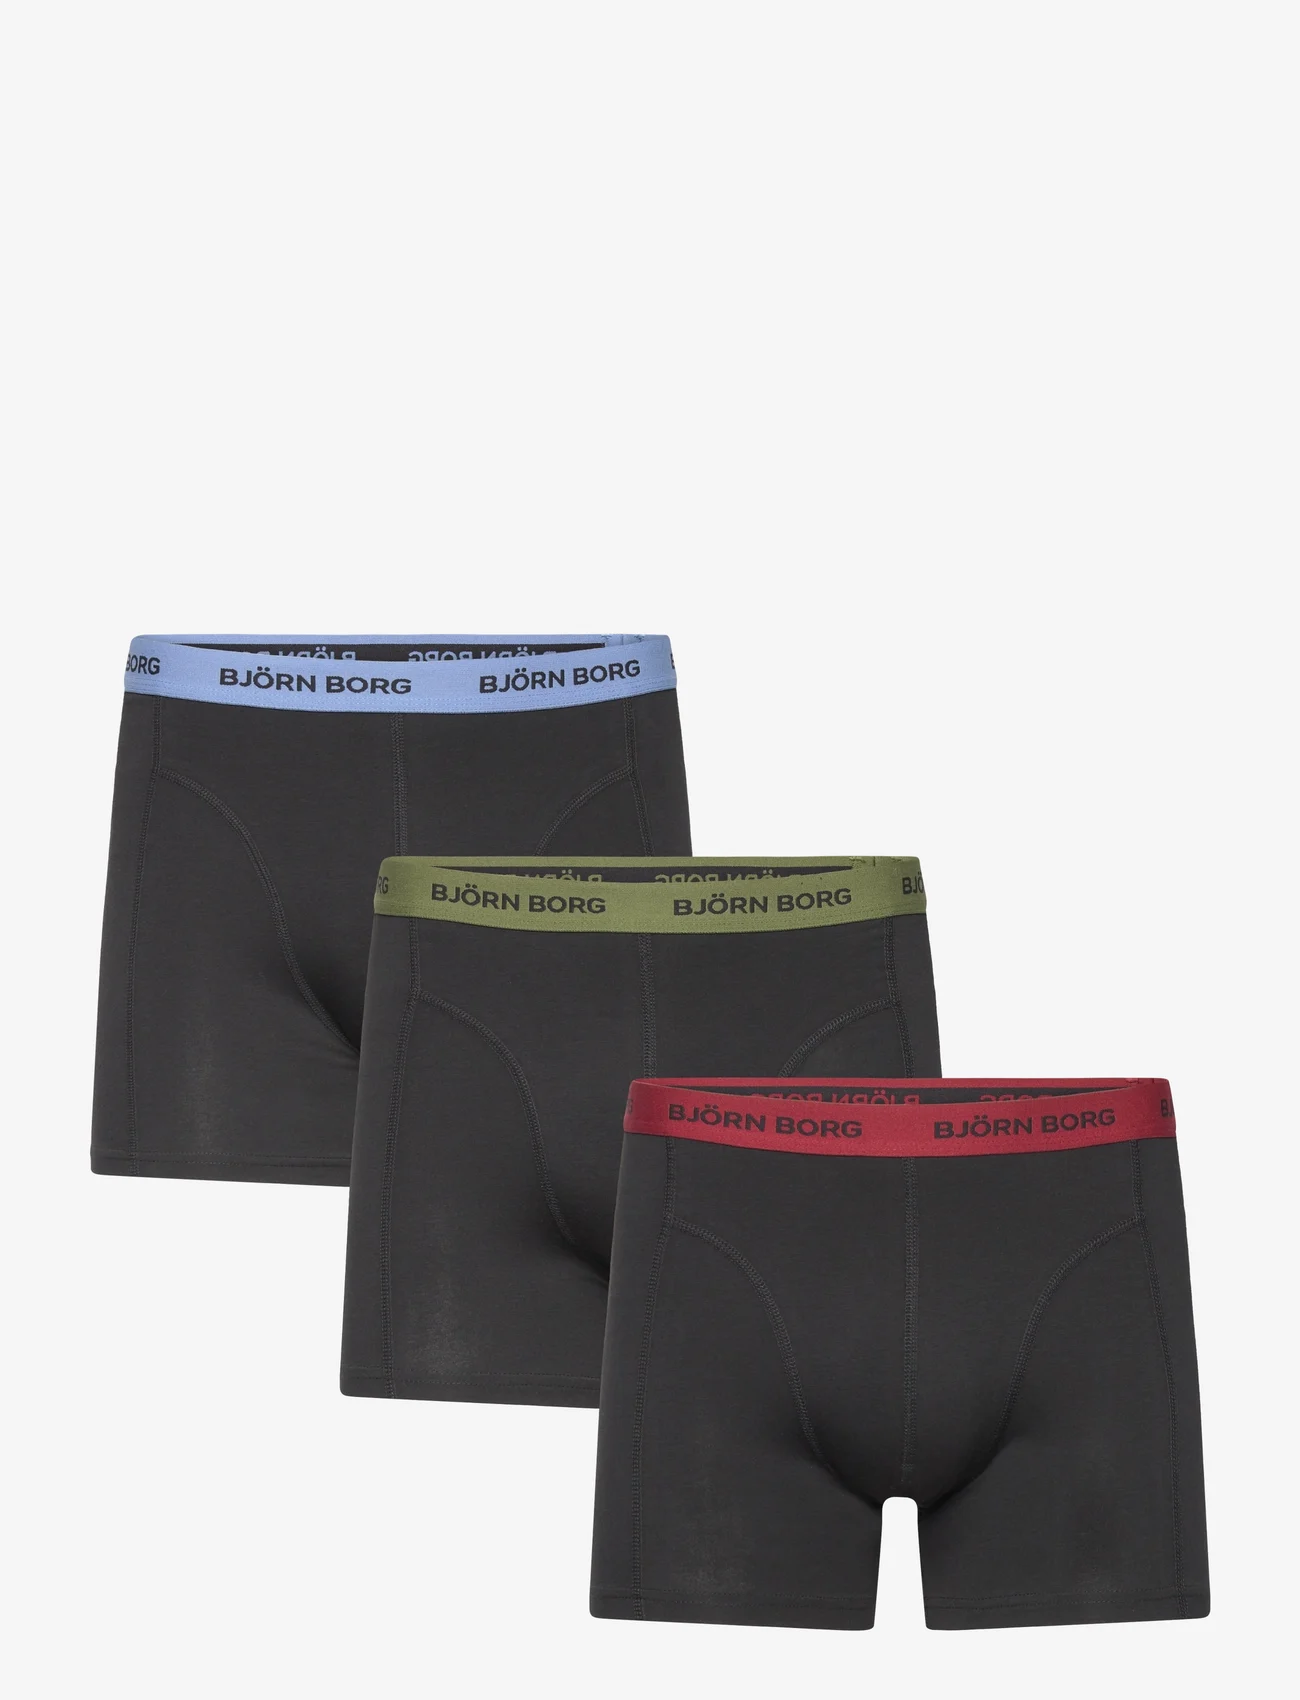 Björn Borg - COTTON STRETCH BOXER 3p - lowest prices - multipack 4 - 0